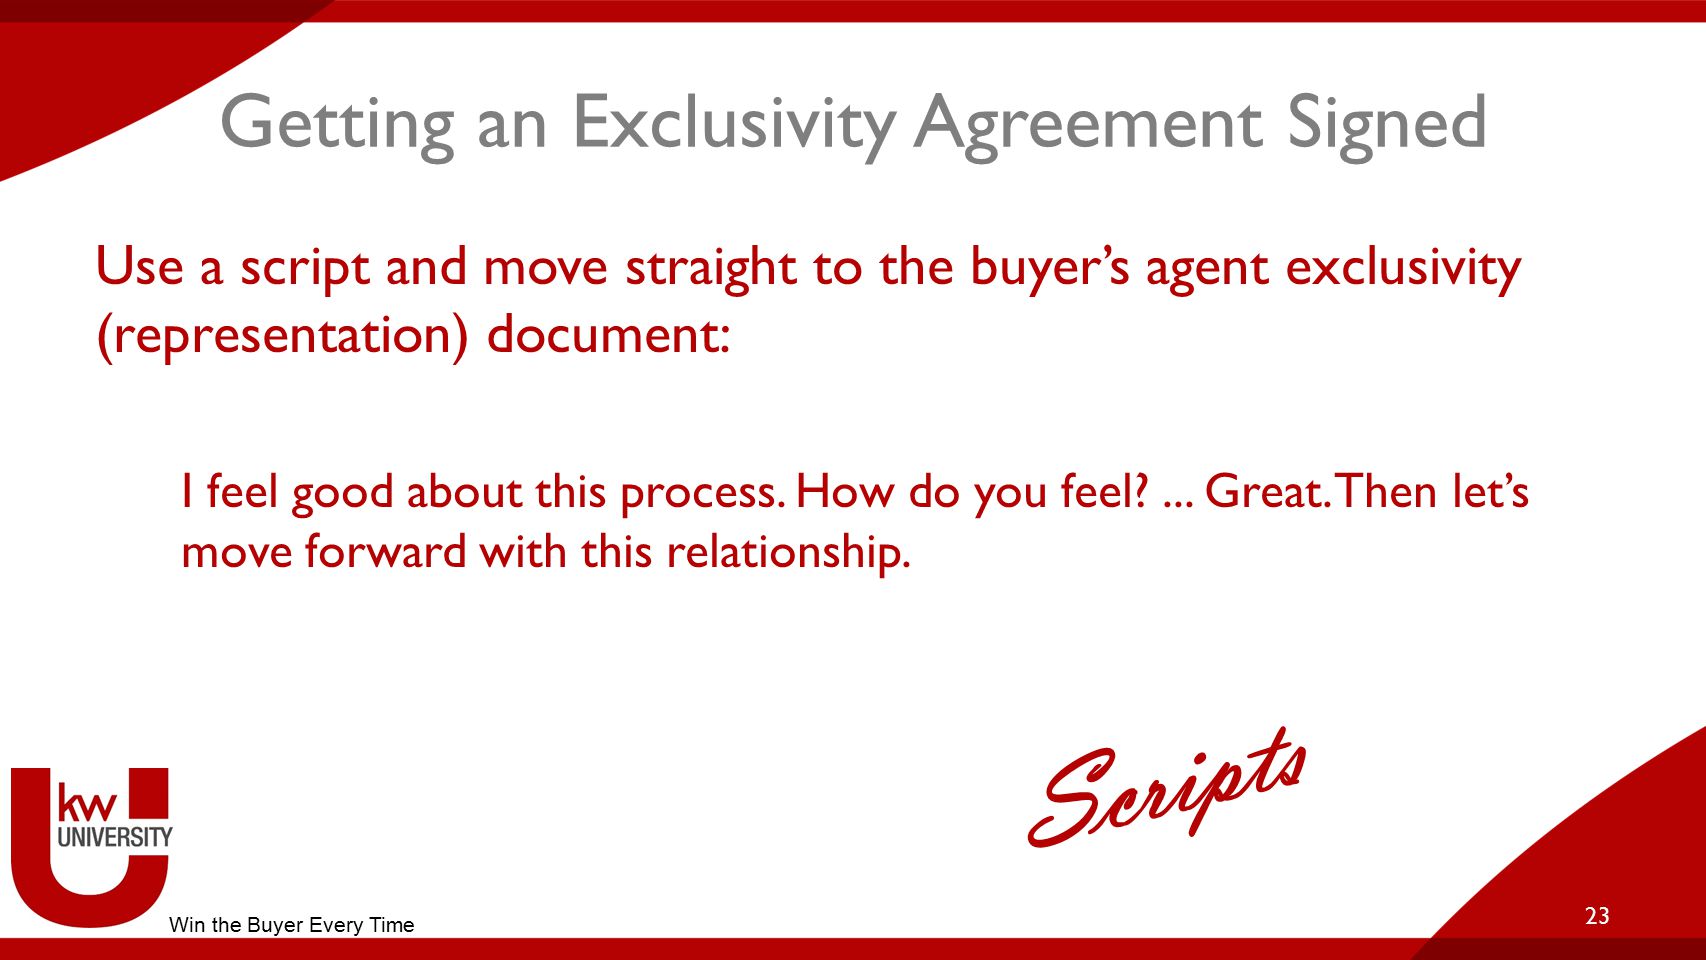 Getting an Exclusivity Agreement Signed